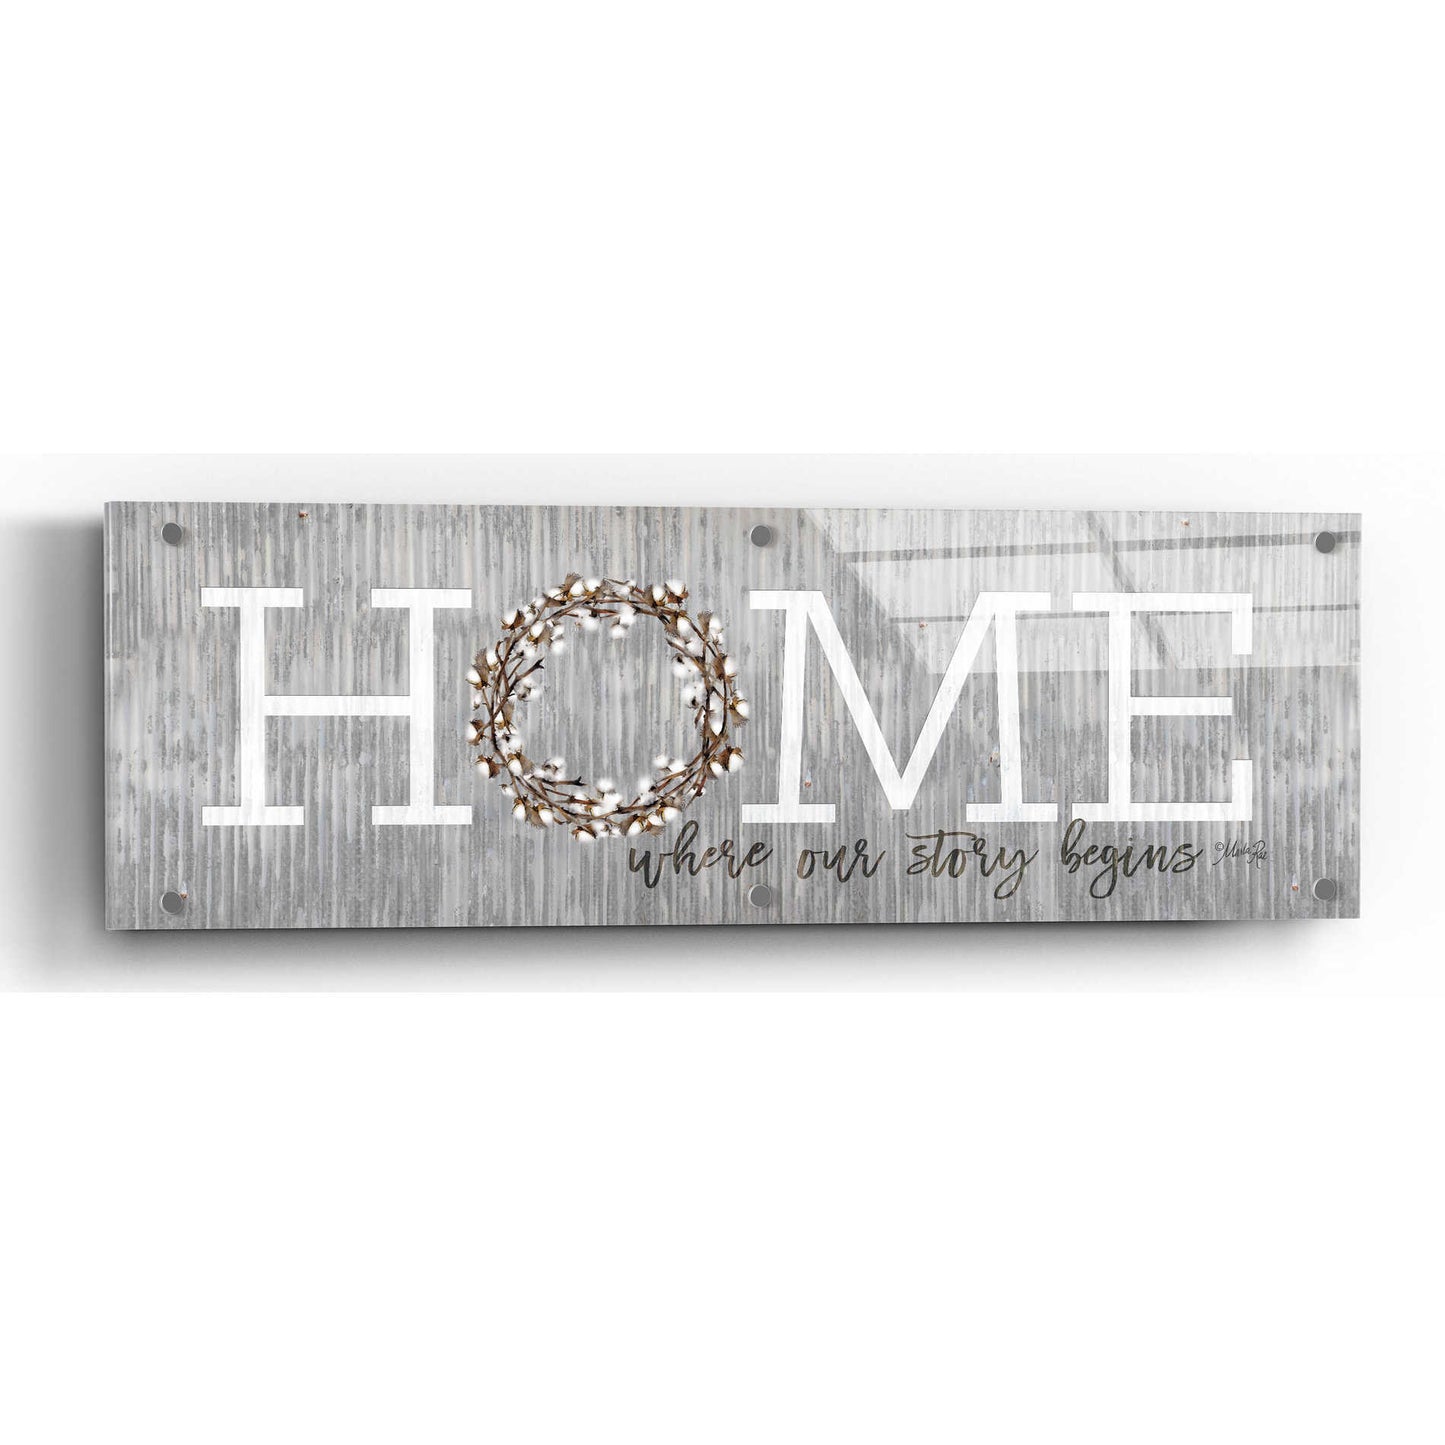 Epic Art 'Home - Where Our Story Begins' by Marla Rae, Acrylic Glass Wall Art,36x12